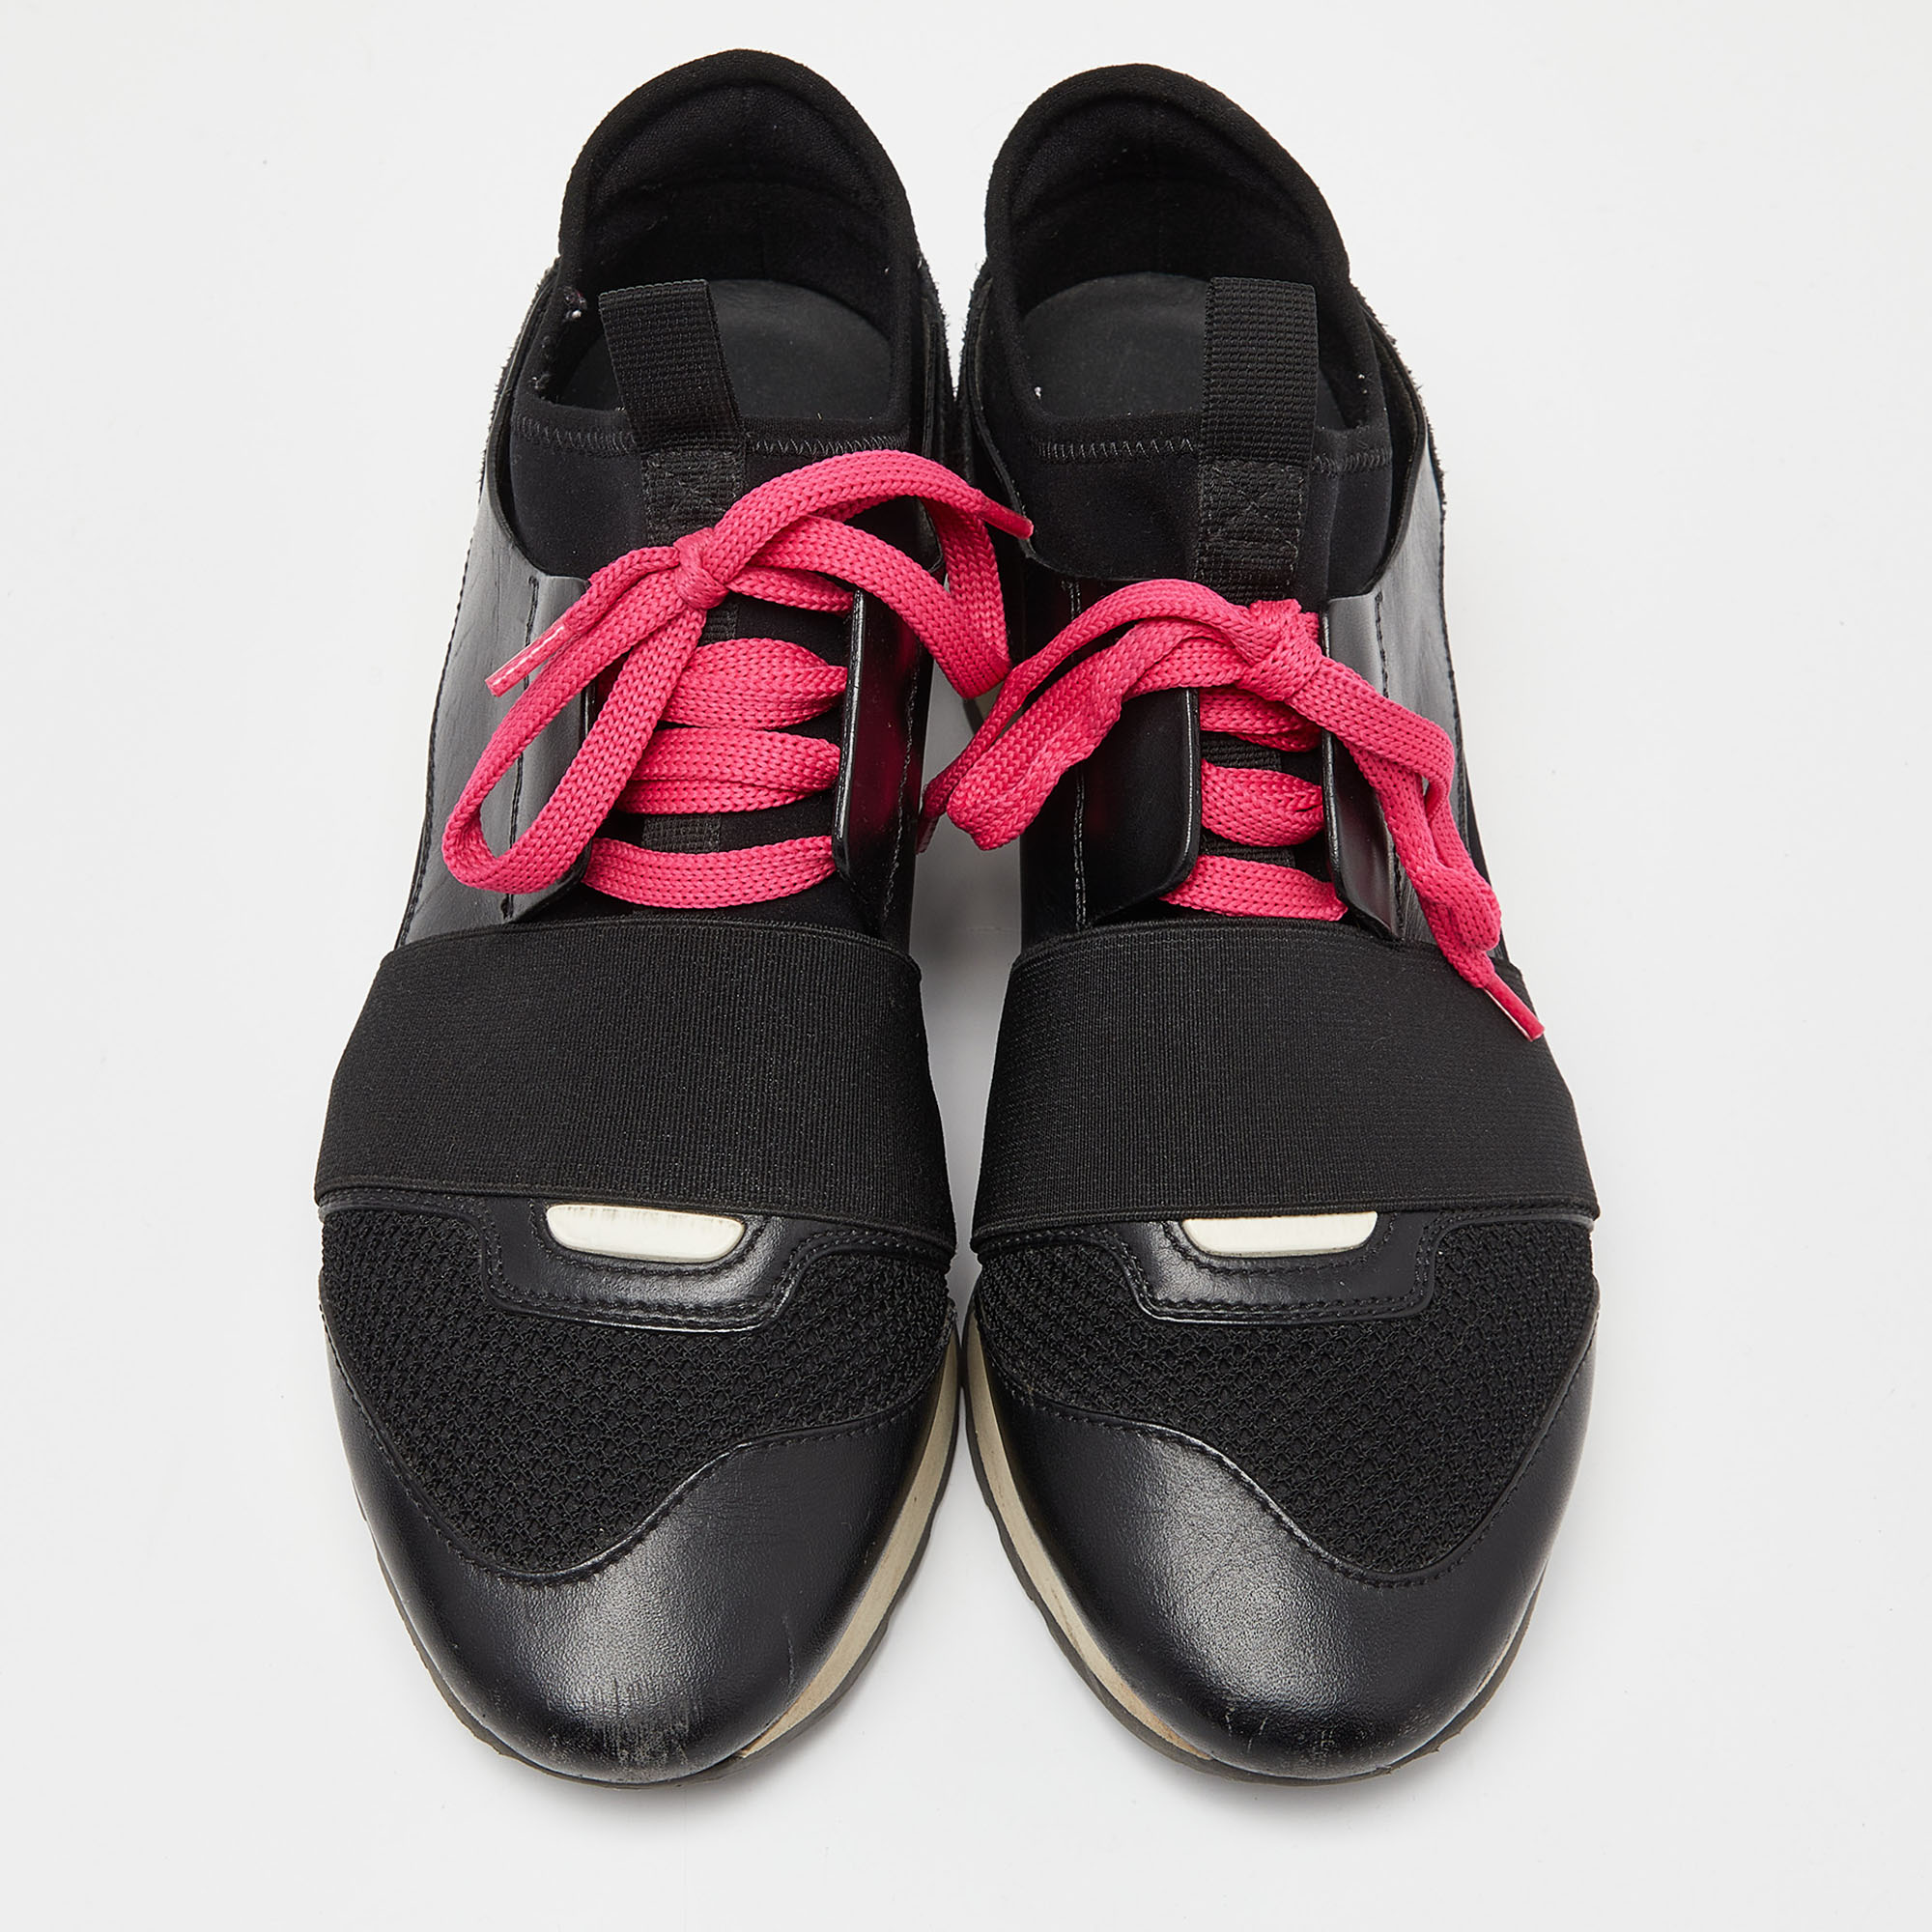 Balenciaga Black/Pink Leather,Suede And Mesh Race Runner Sneakers Size 37